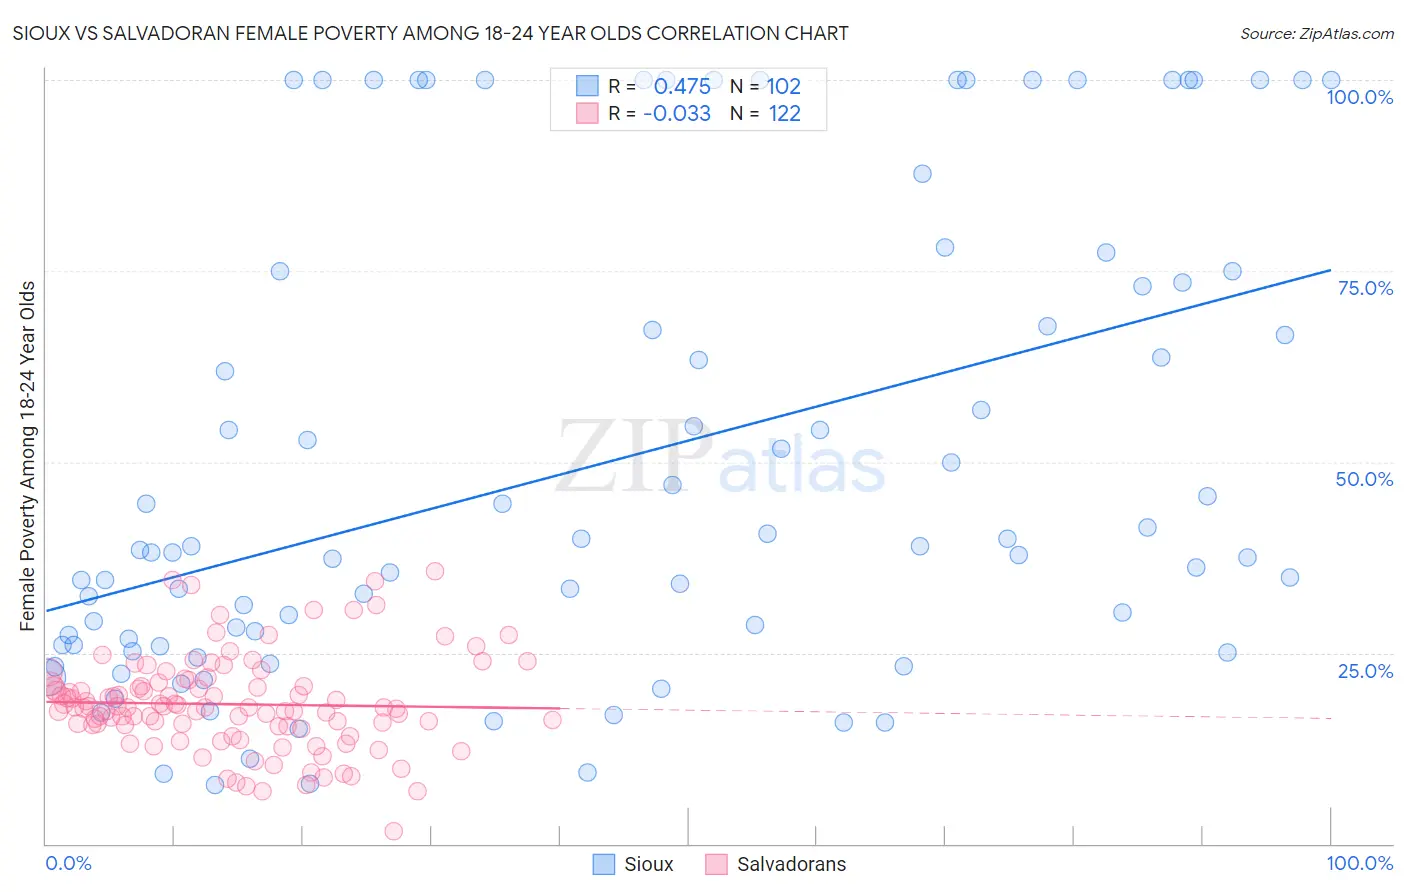 Sioux vs Salvadoran Female Poverty Among 18-24 Year Olds